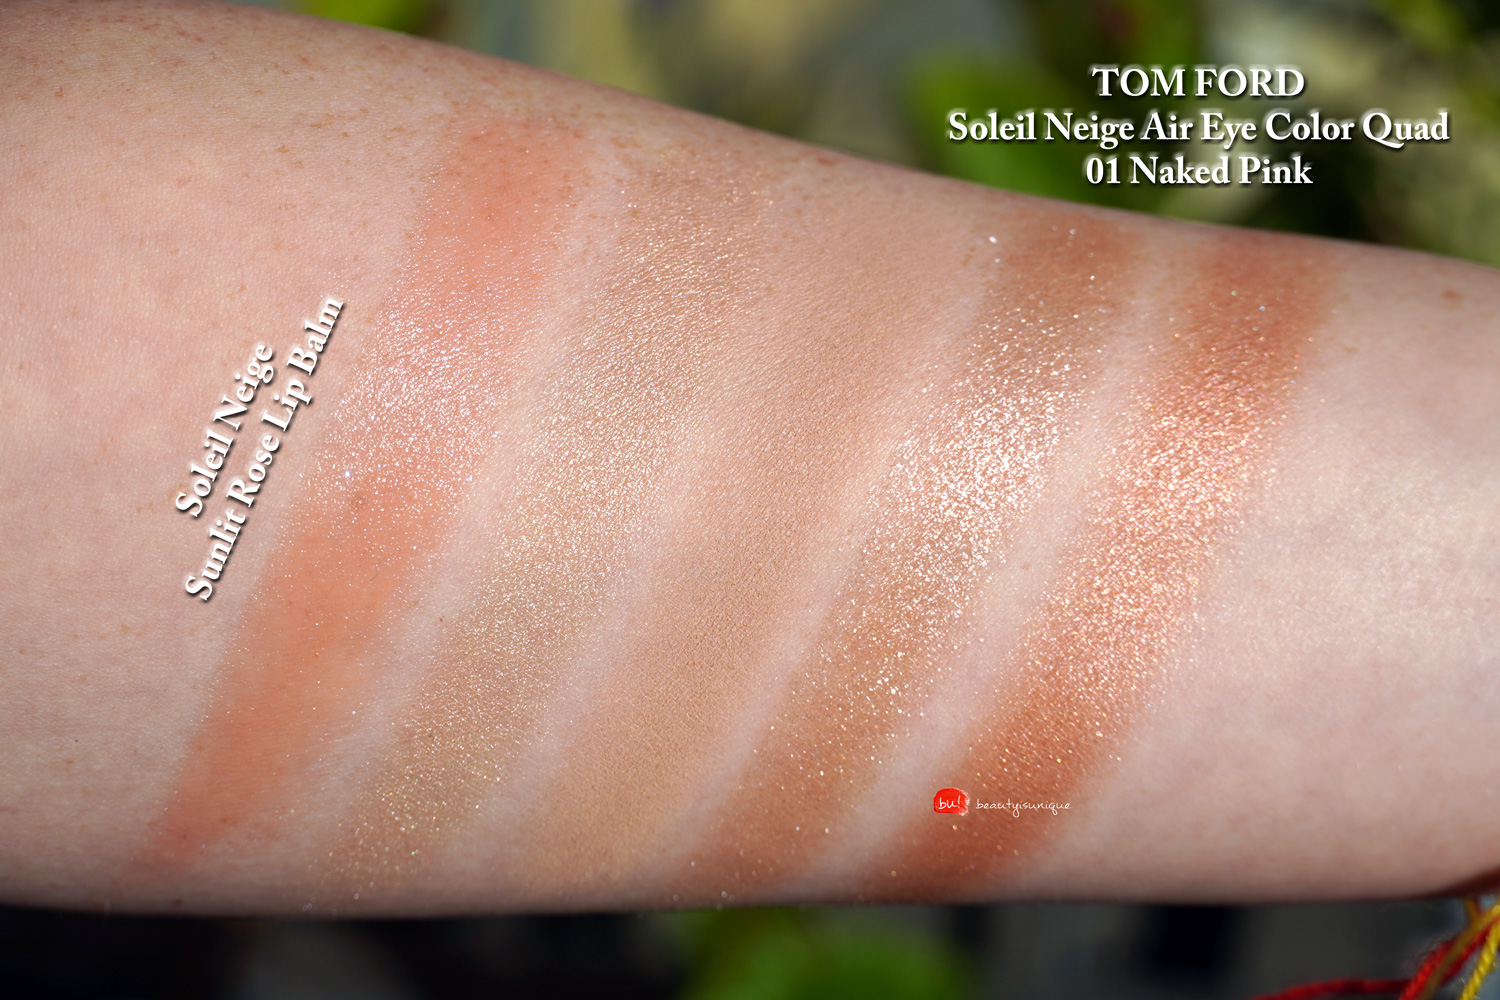 Tom-ford-naked-pink-soleil-neige-air-eye-quad-swatches